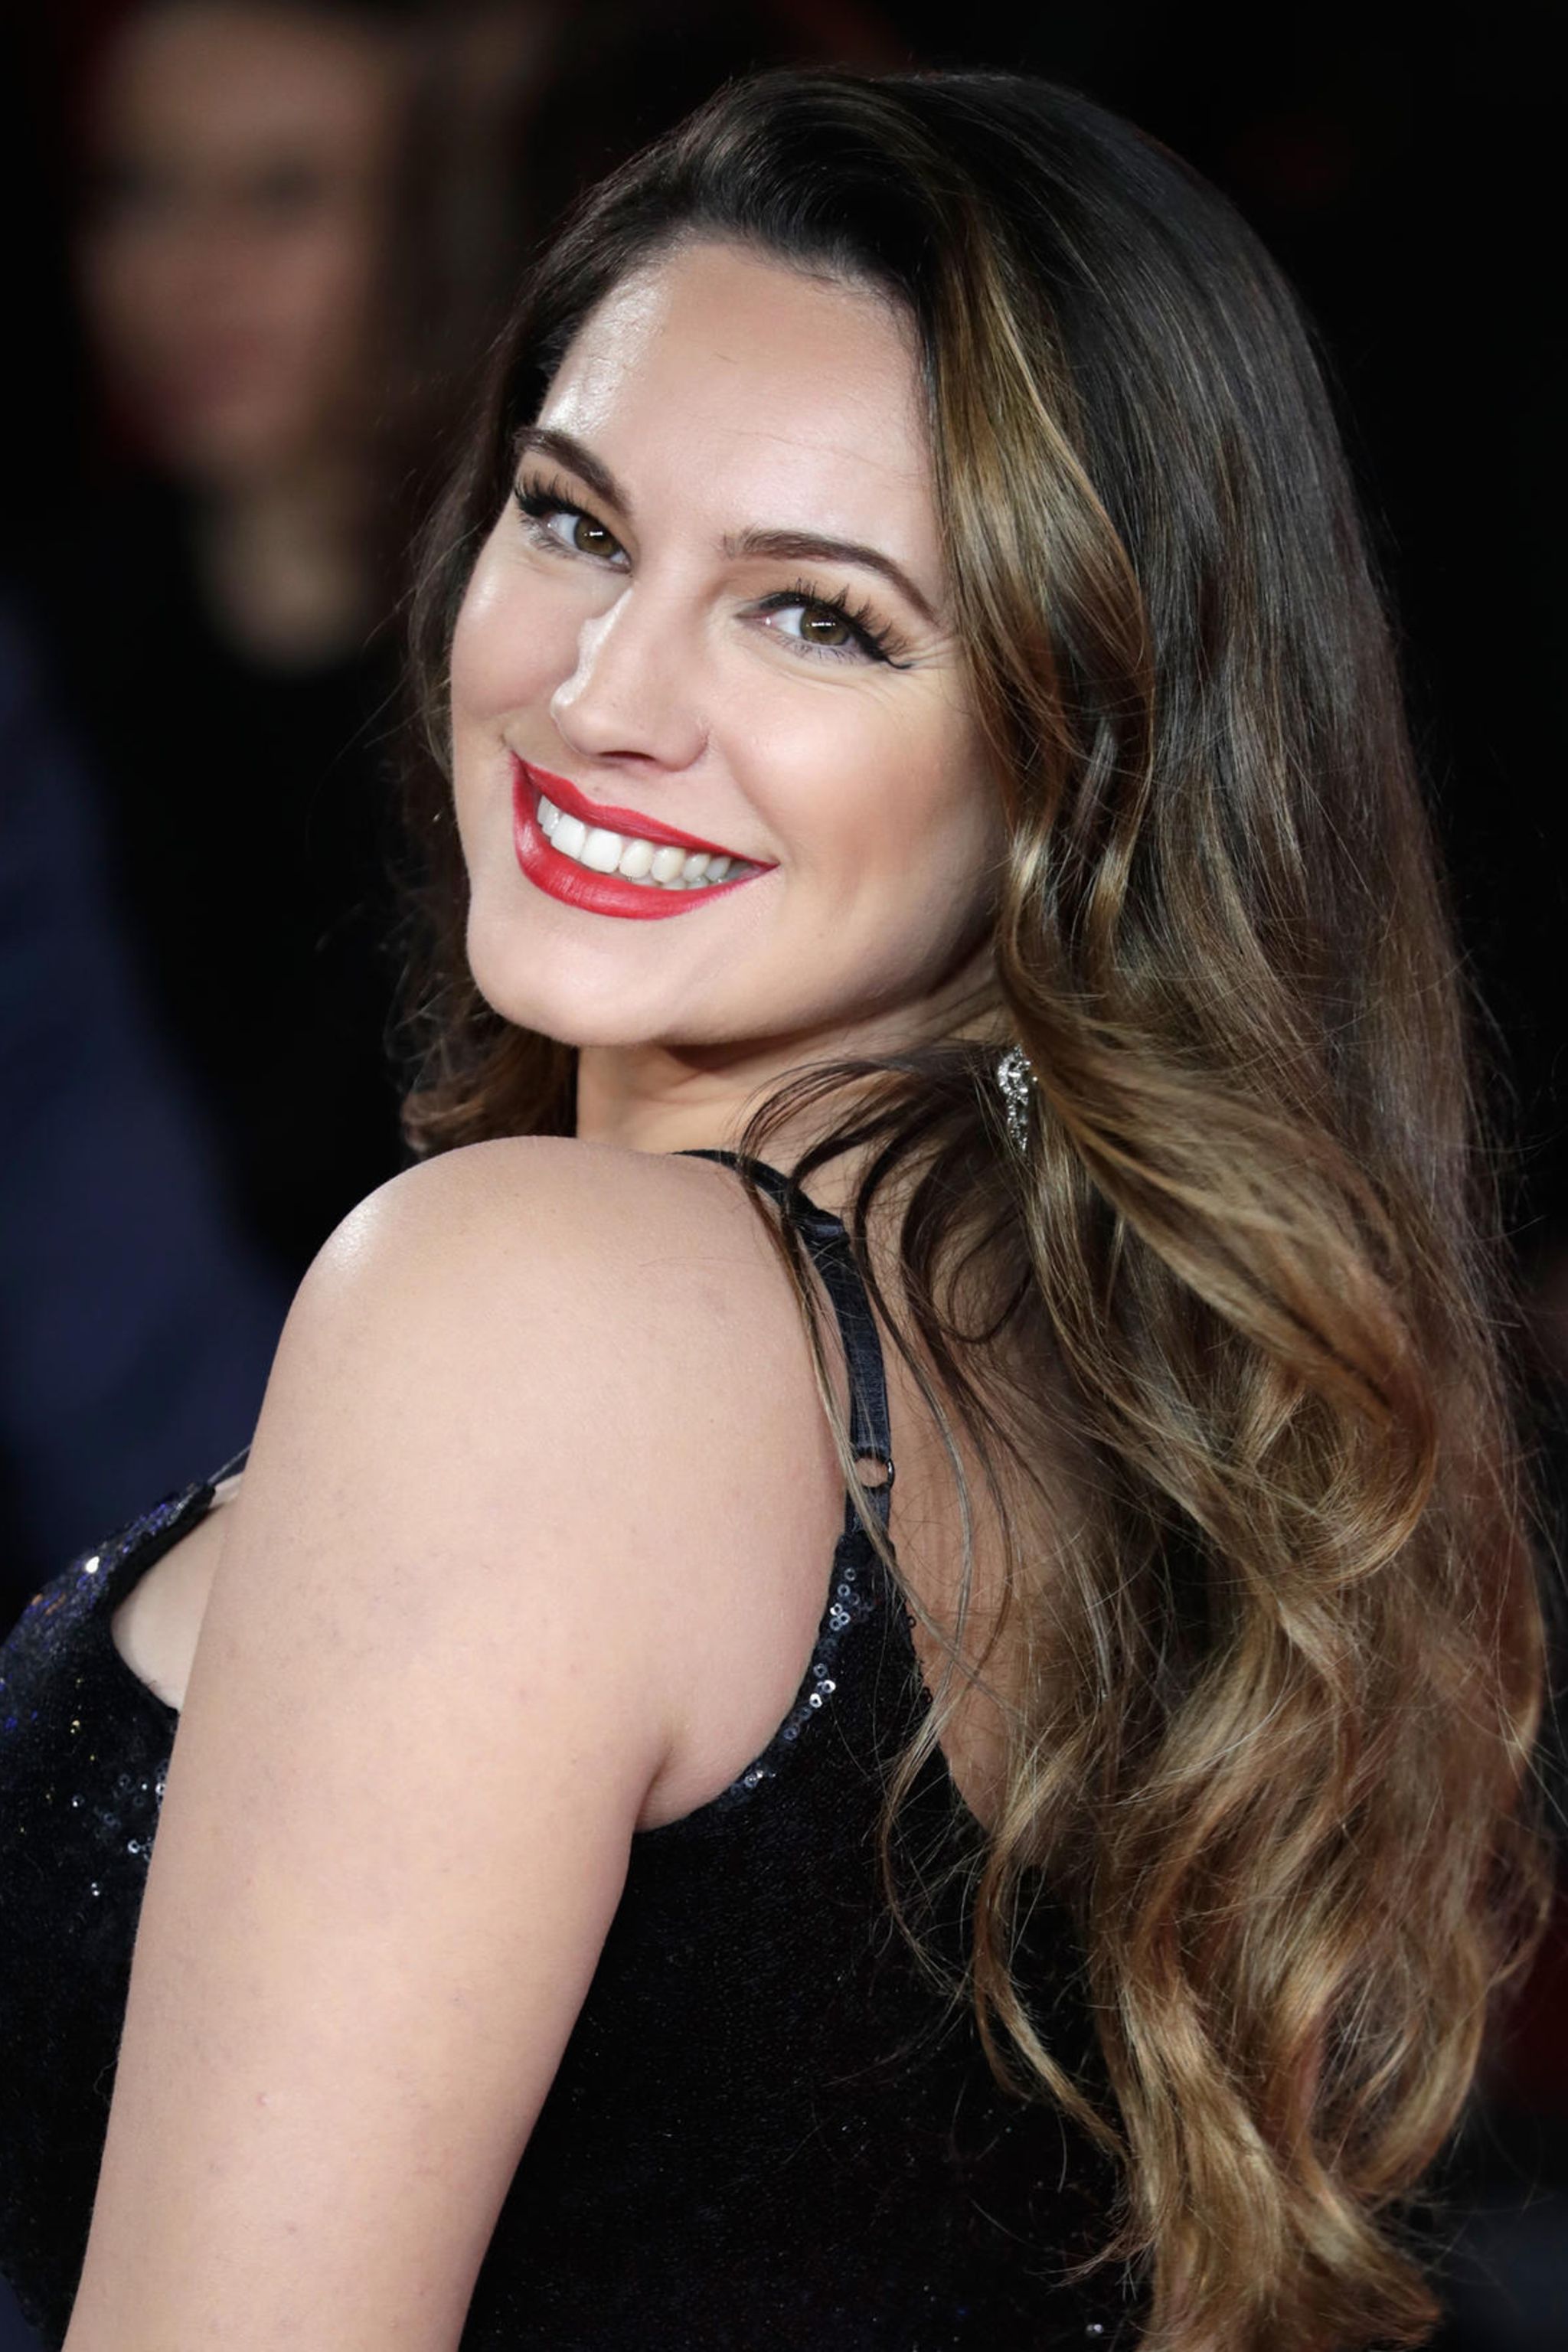 david salzer recommends Kelly Brook Hot Video